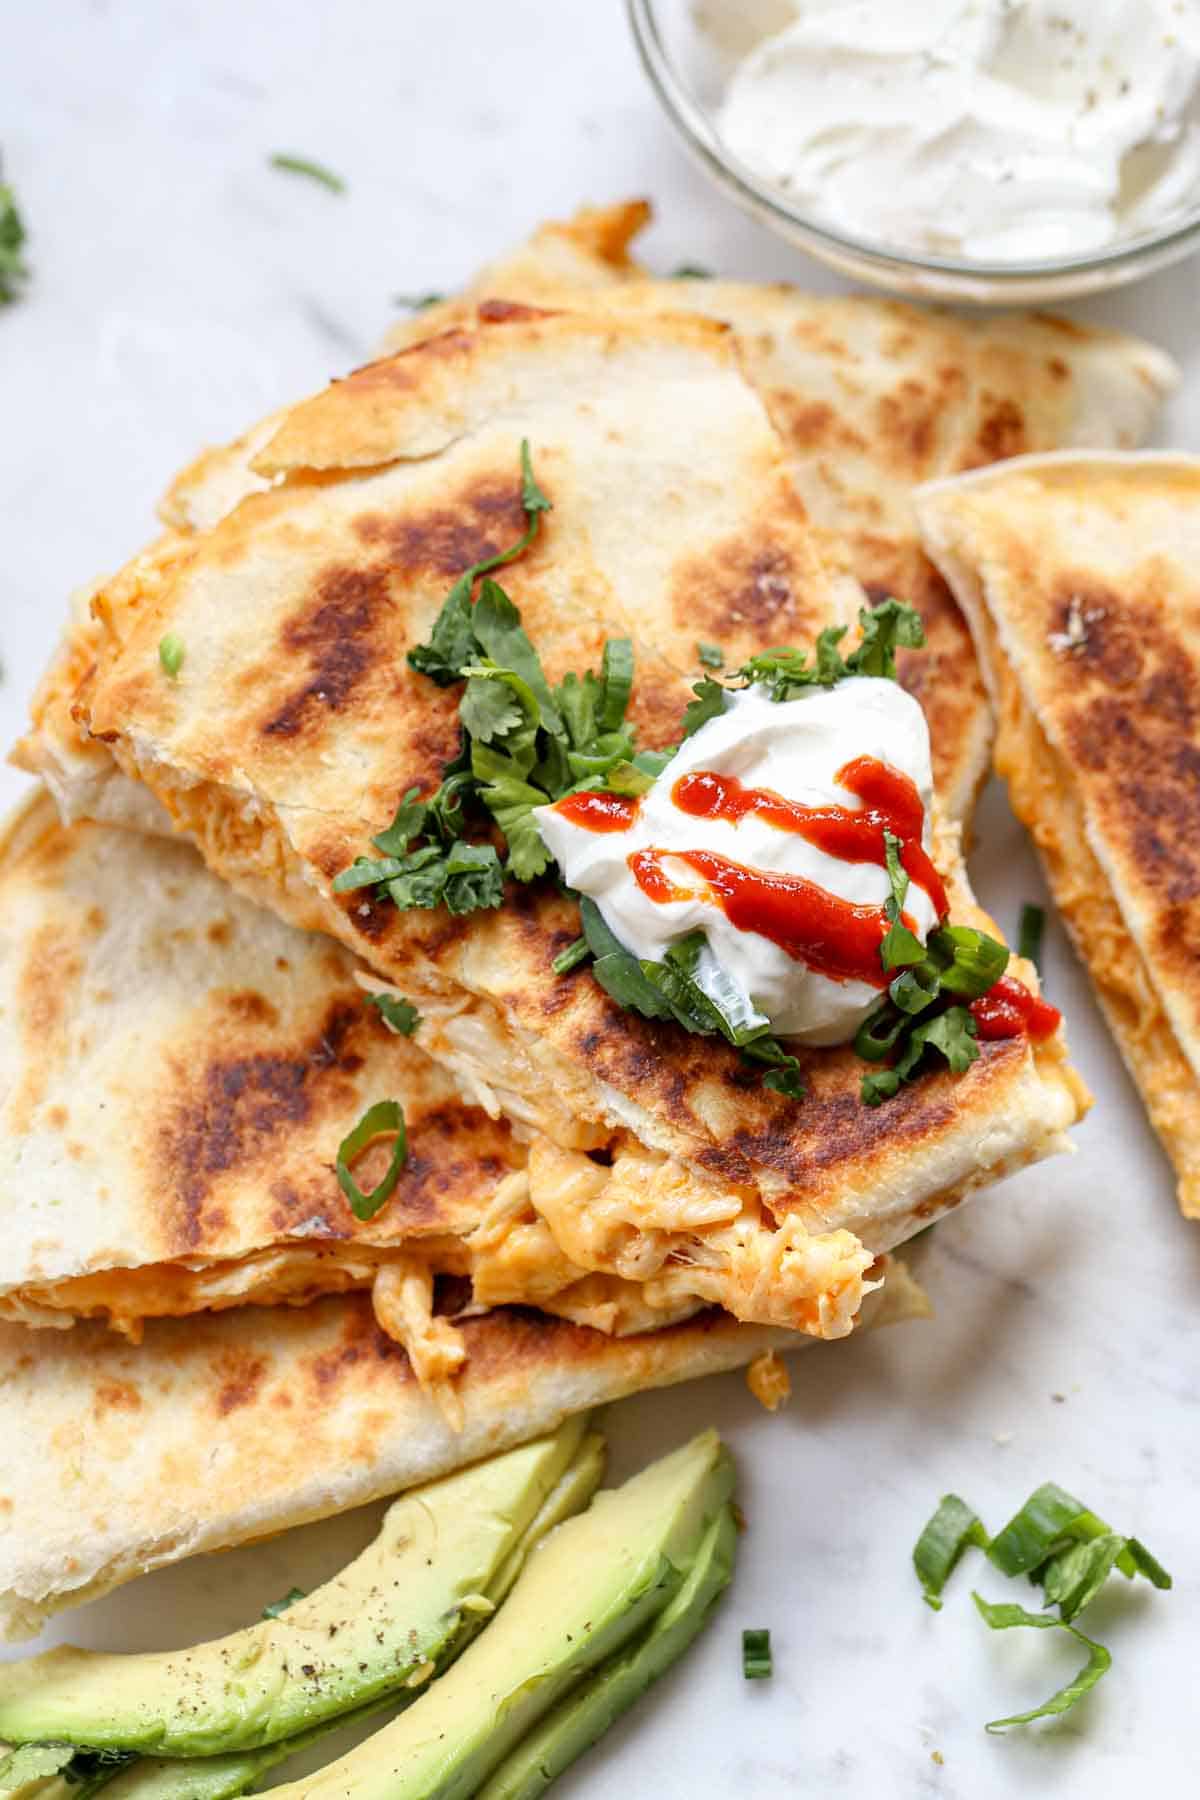 Slices of a chicken quesadilla with a dollop of sour cream on top, sprinkled with cilantro.